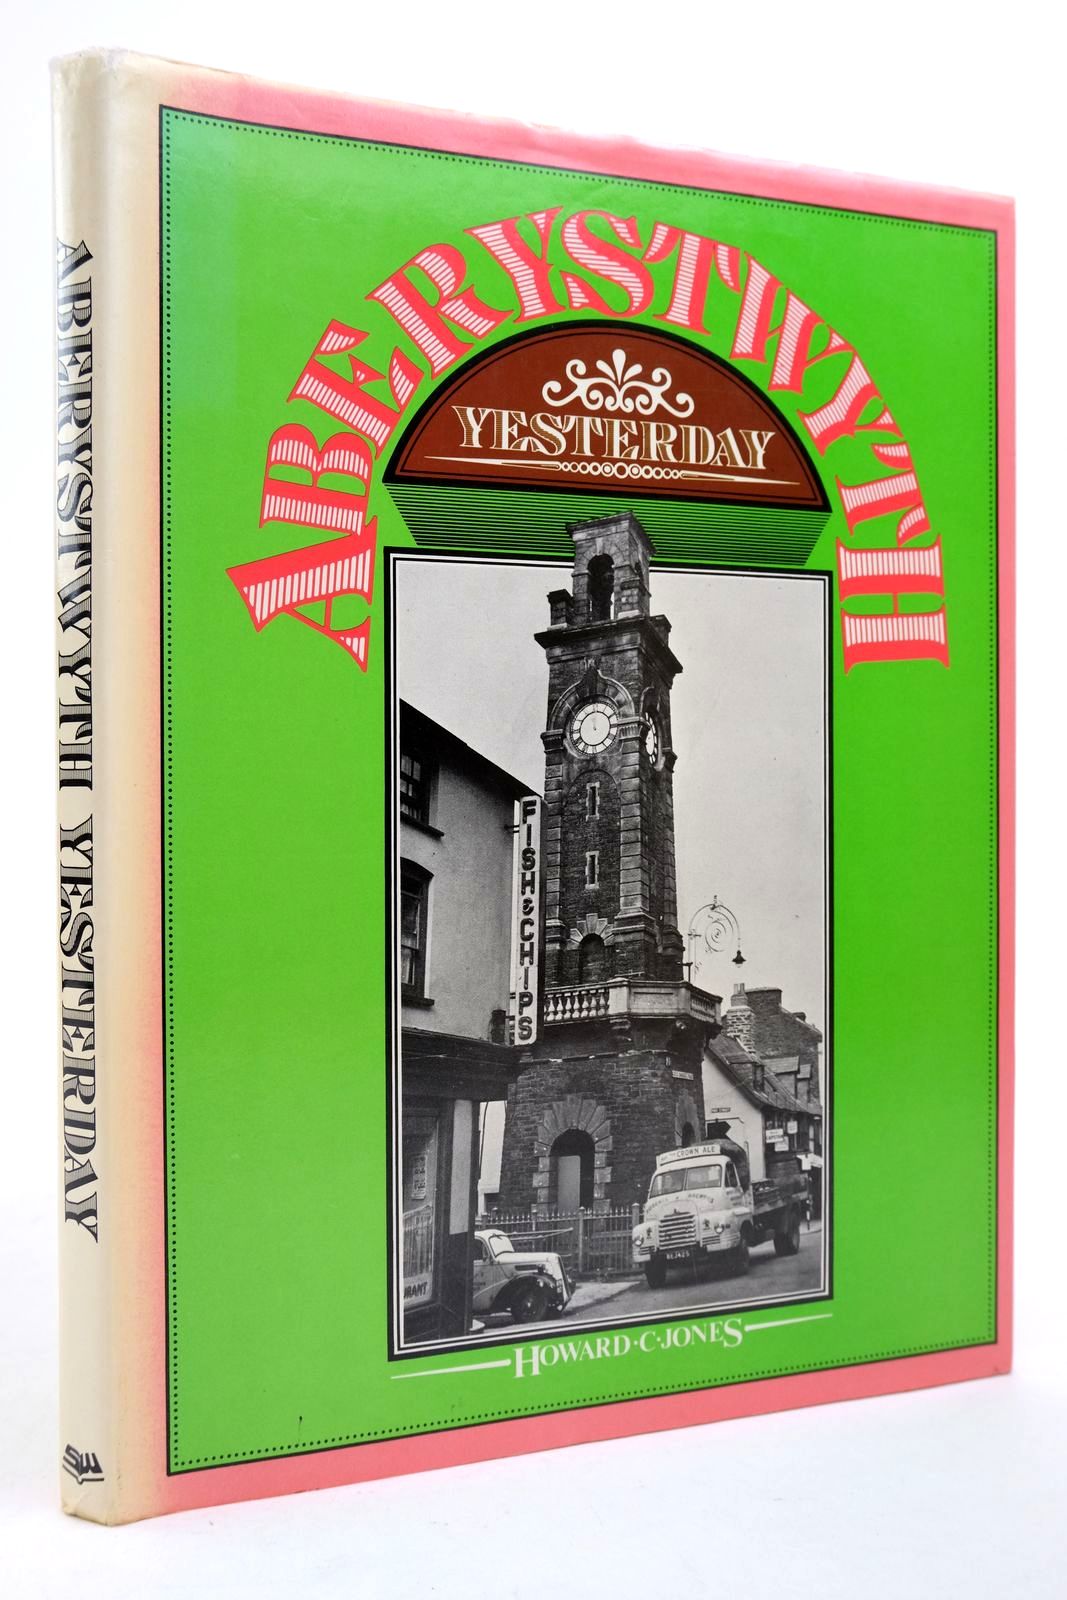 Photo of ABERYSTWYTH YESTERDAY written by Jones, Howard C. published by Stewart Williams (STOCK CODE: 2140653)  for sale by Stella & Rose's Books